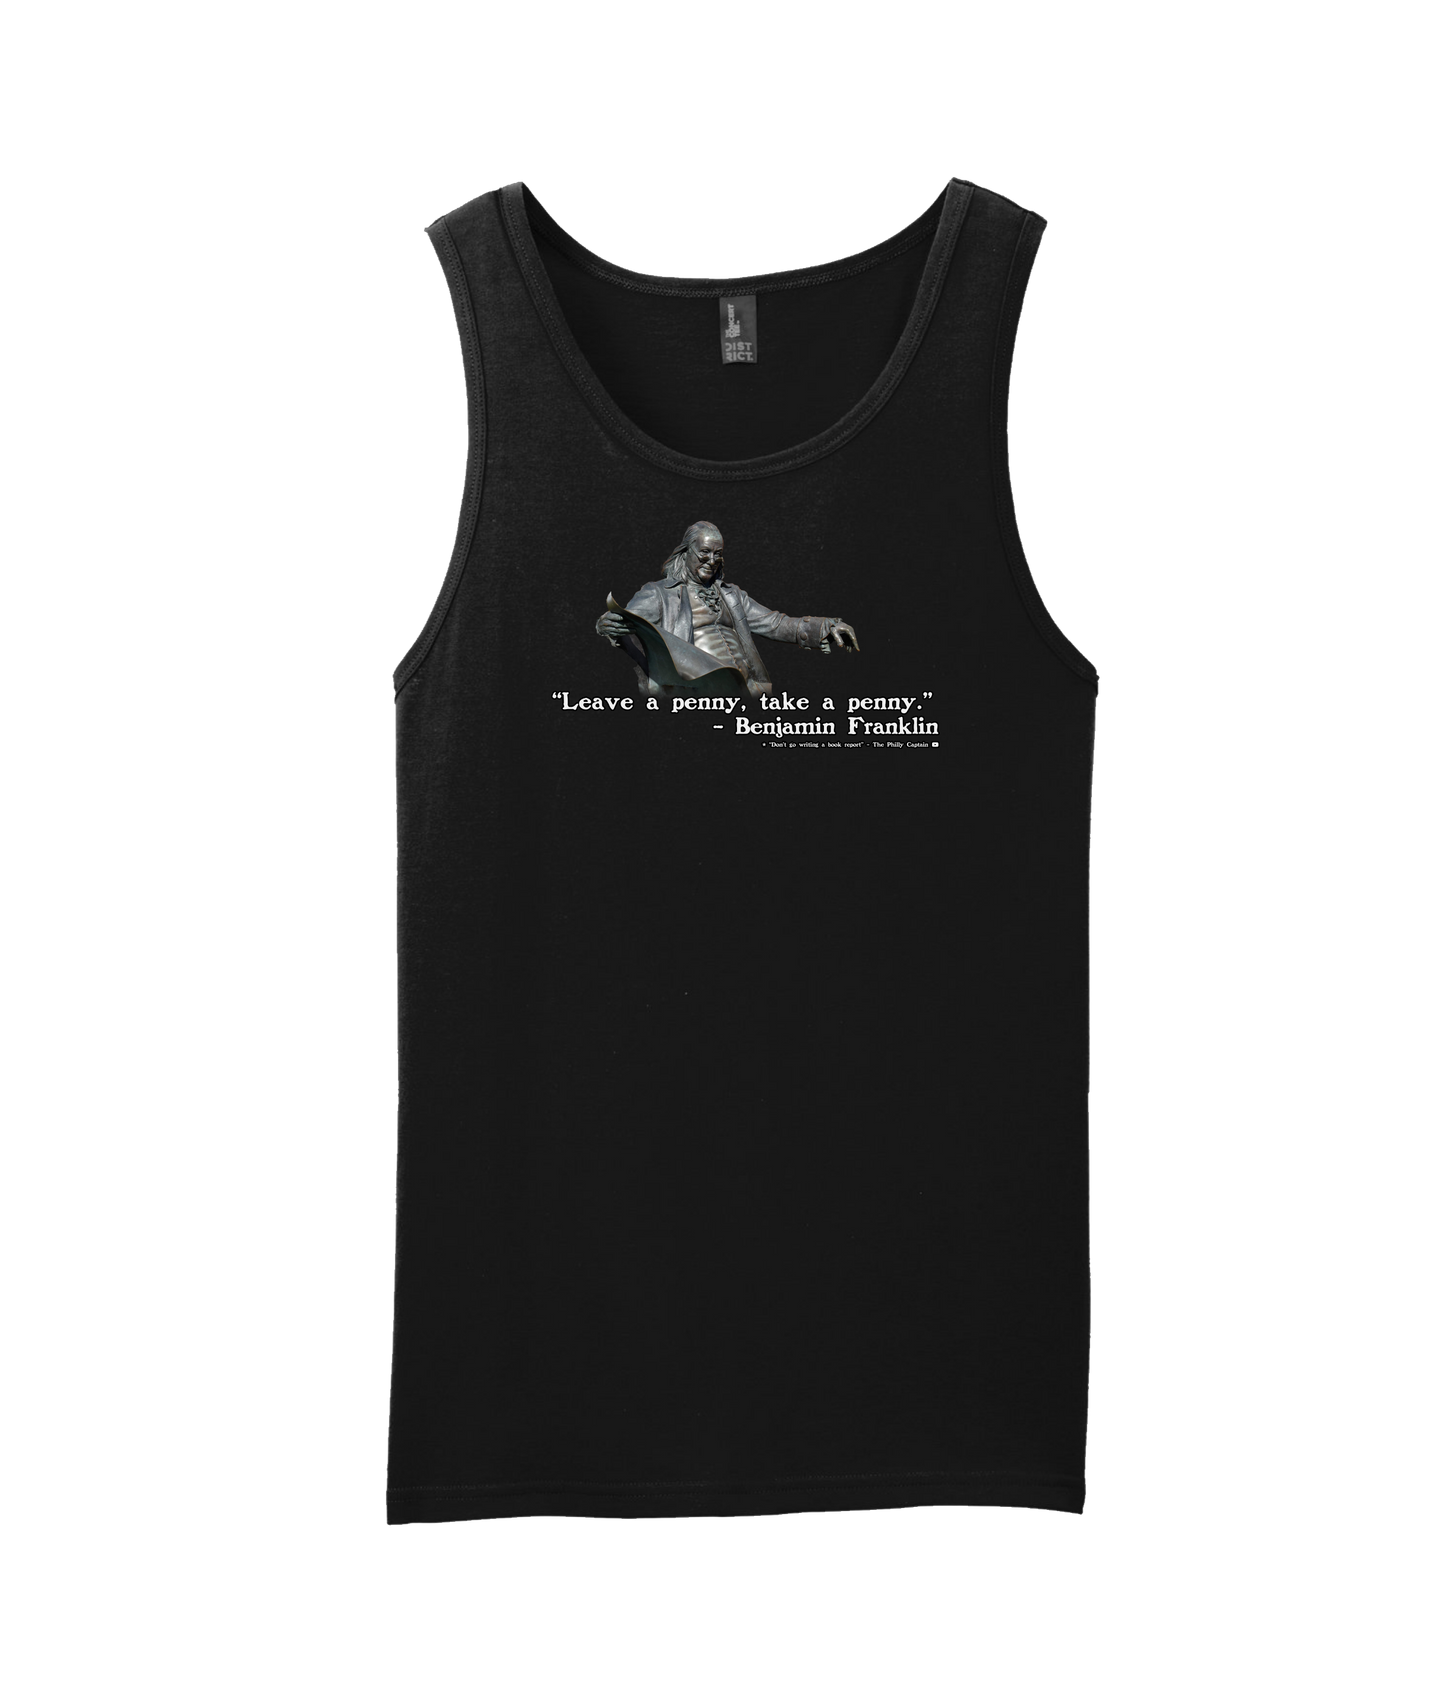 The Philly Captain's Merch is Fire - Leave a penny, take a penny - Black Tank Top